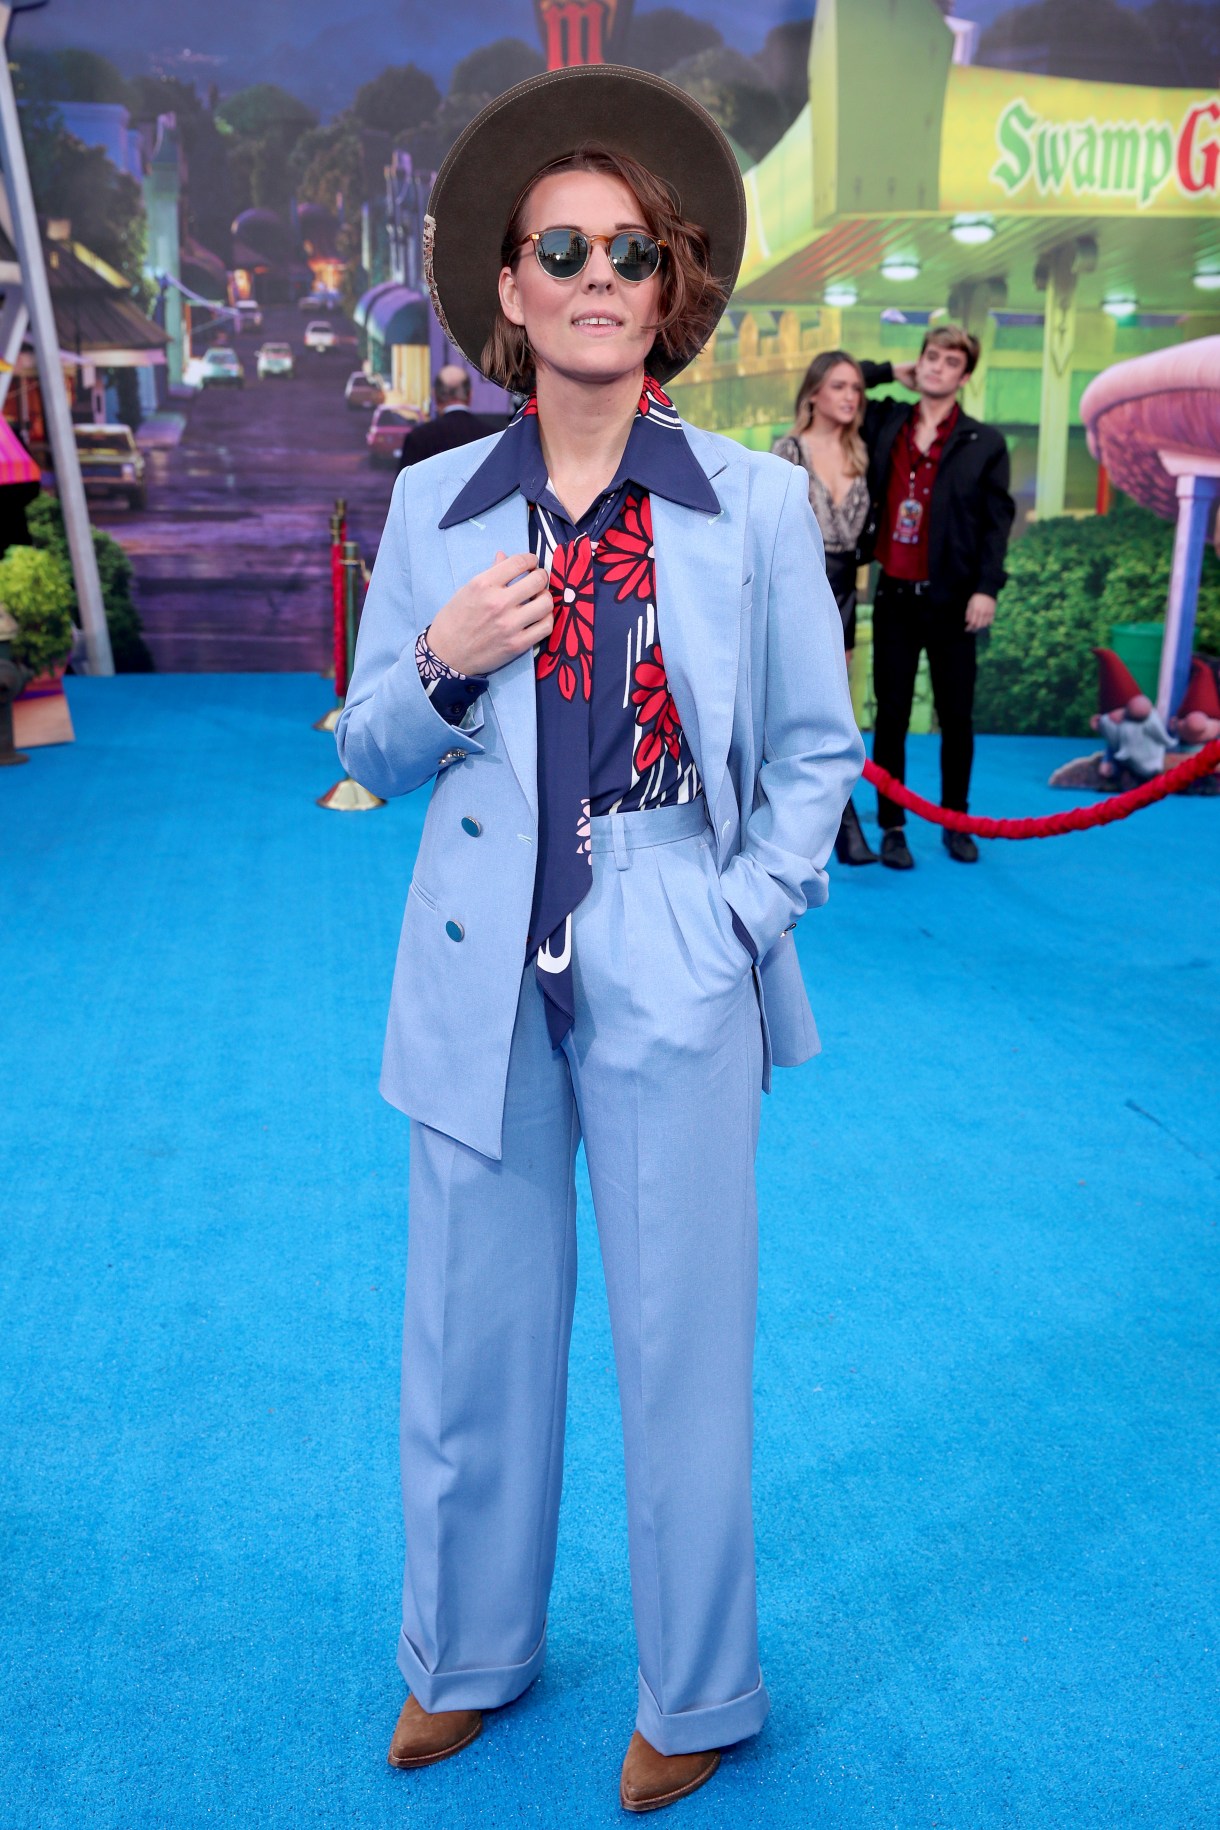 HOLLYWOOD, CALIFORNIA - FEBRUARY 18: Brandi Carlile attends the Premiere of Disney and Pixar's "Onward" on February 18, 2020 in Hollywood, California. (Photo by Rich Fury/Getty Images)